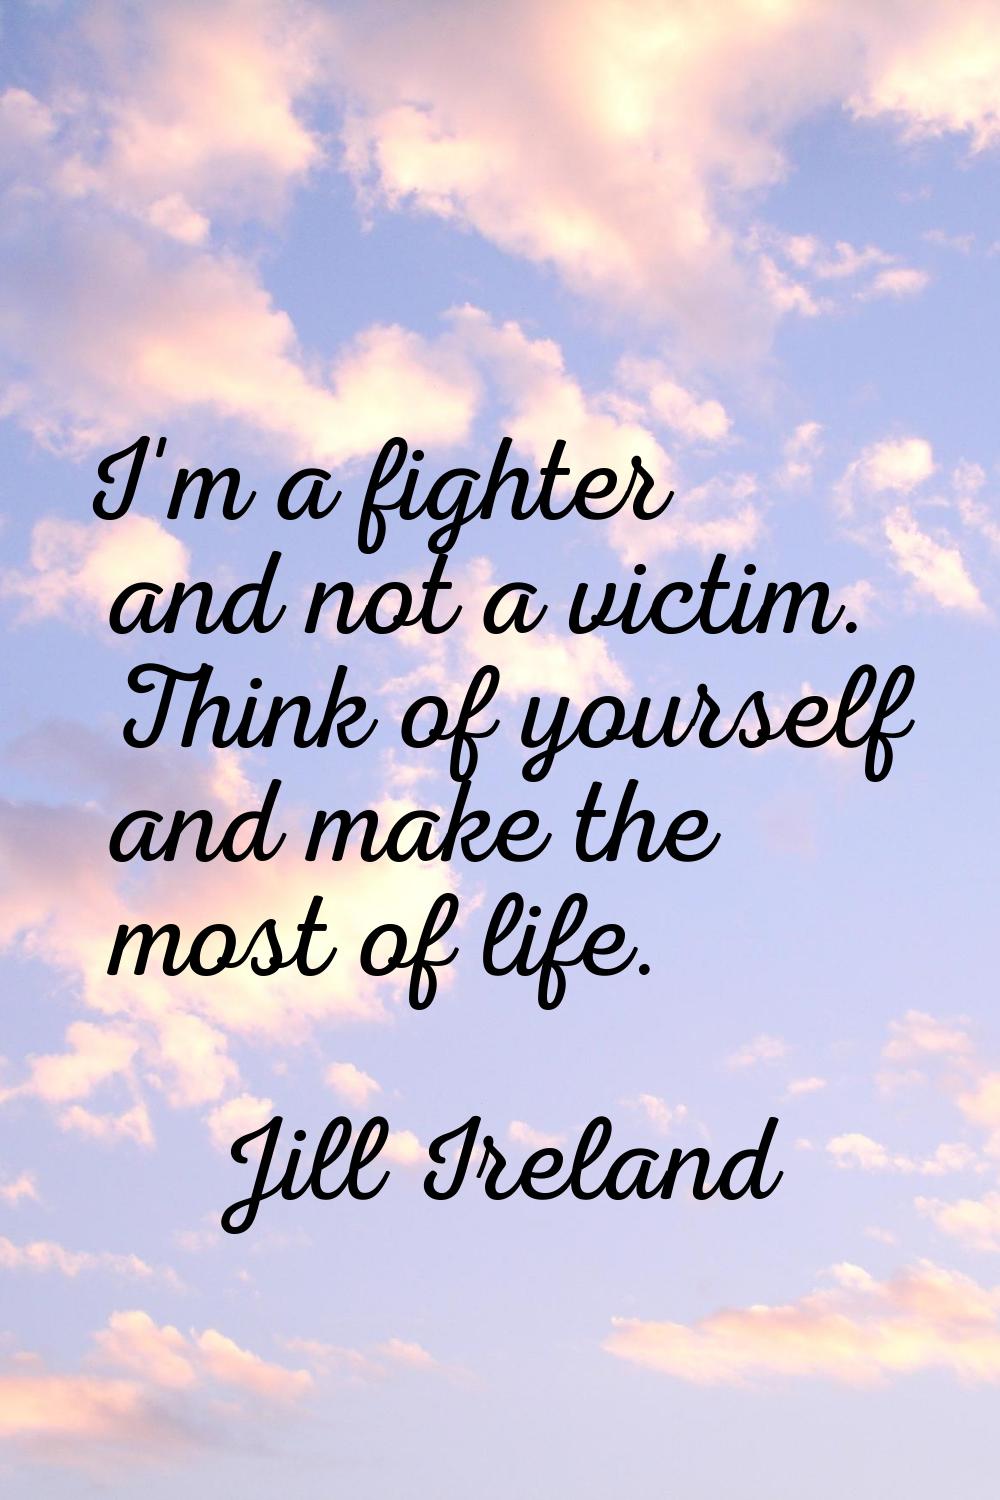 I'm a fighter and not a victim. Think of yourself and make the most of life.